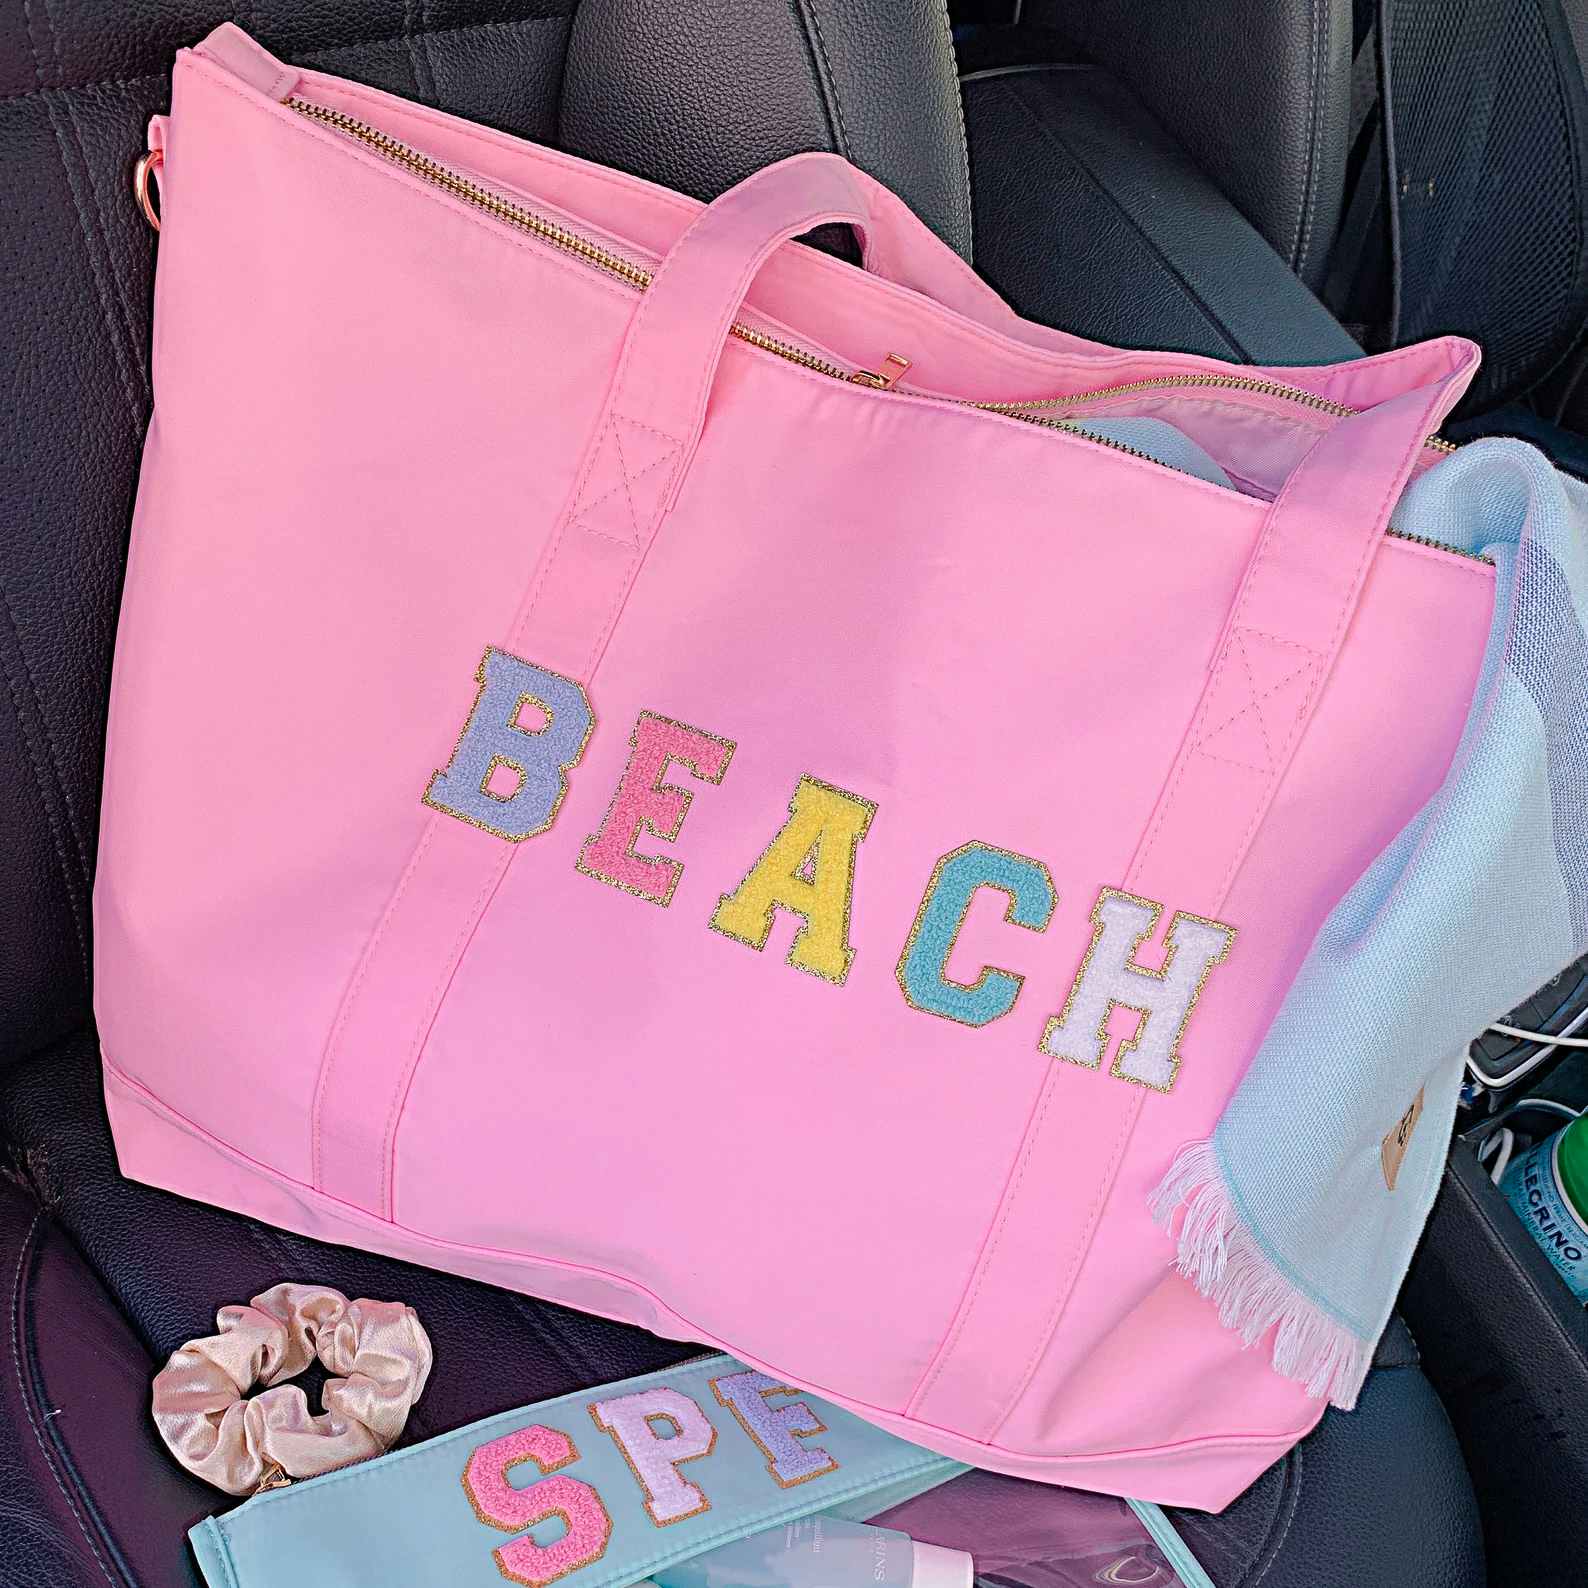 A tote bag that says "Beach" on the front in custom patches sitting in the passenger seat of a vehicle.